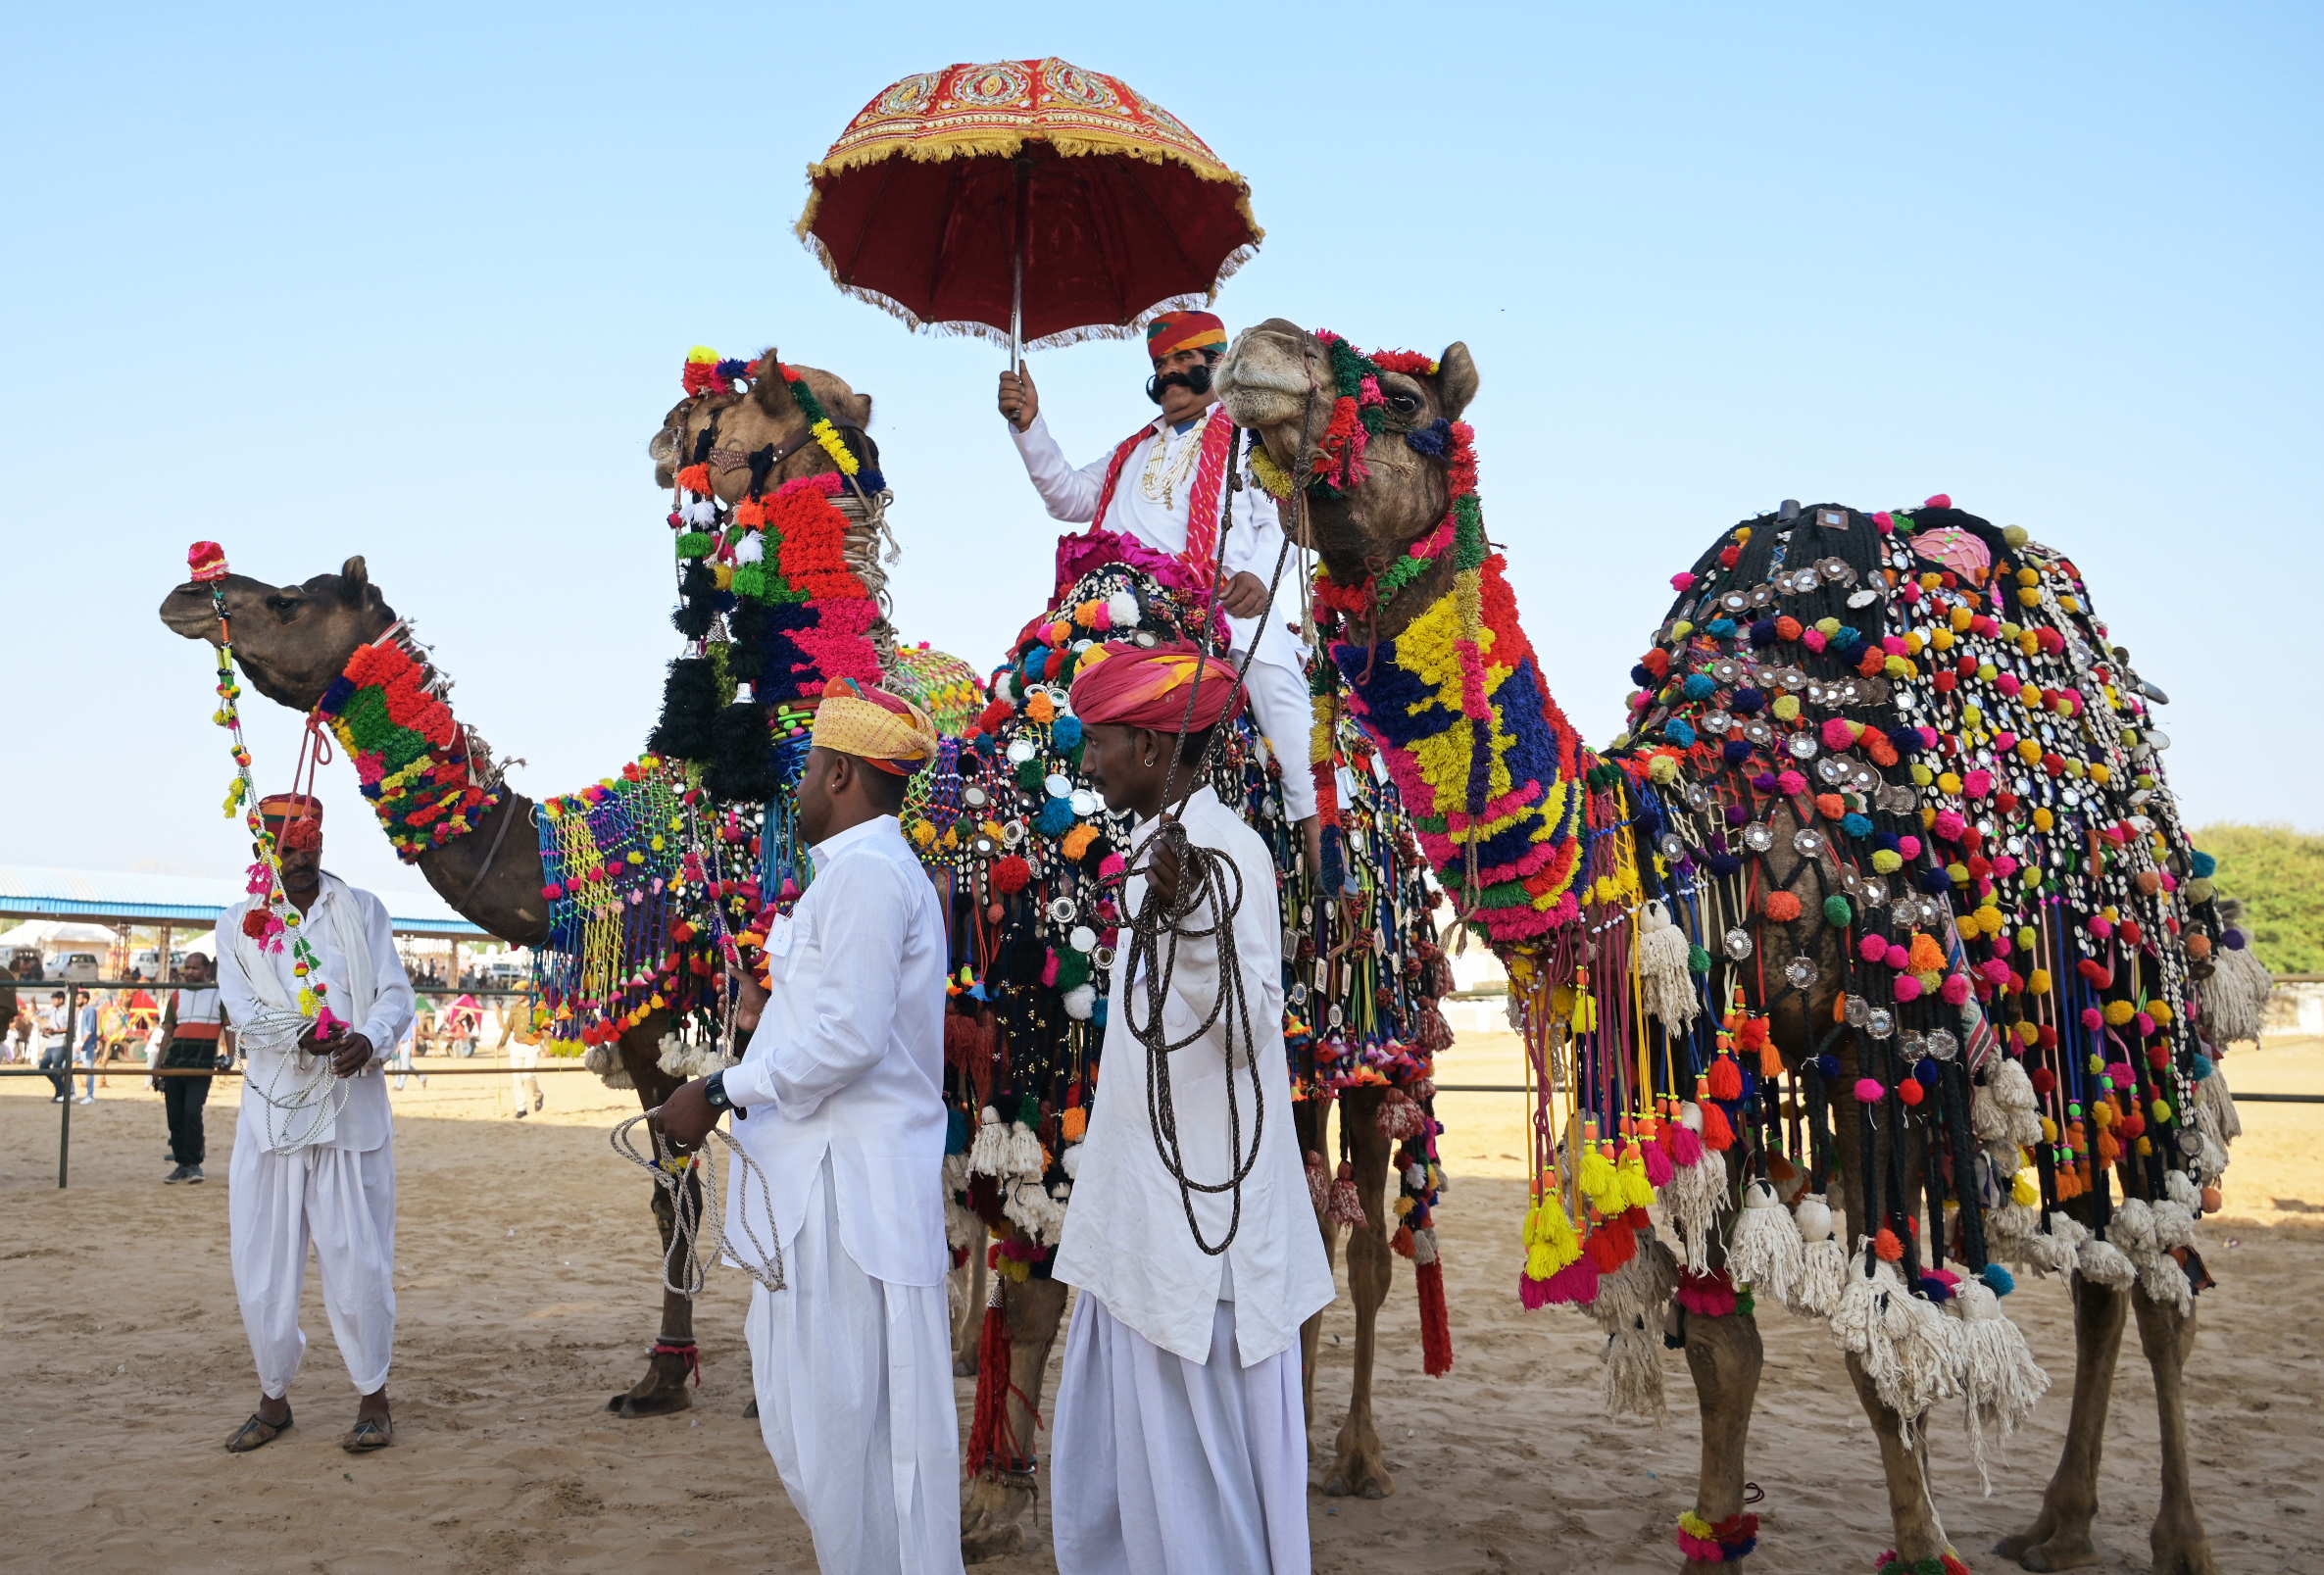 Men dressed in traditional Rajasthani attire with their camels during the International Holi Festival in Pushkar